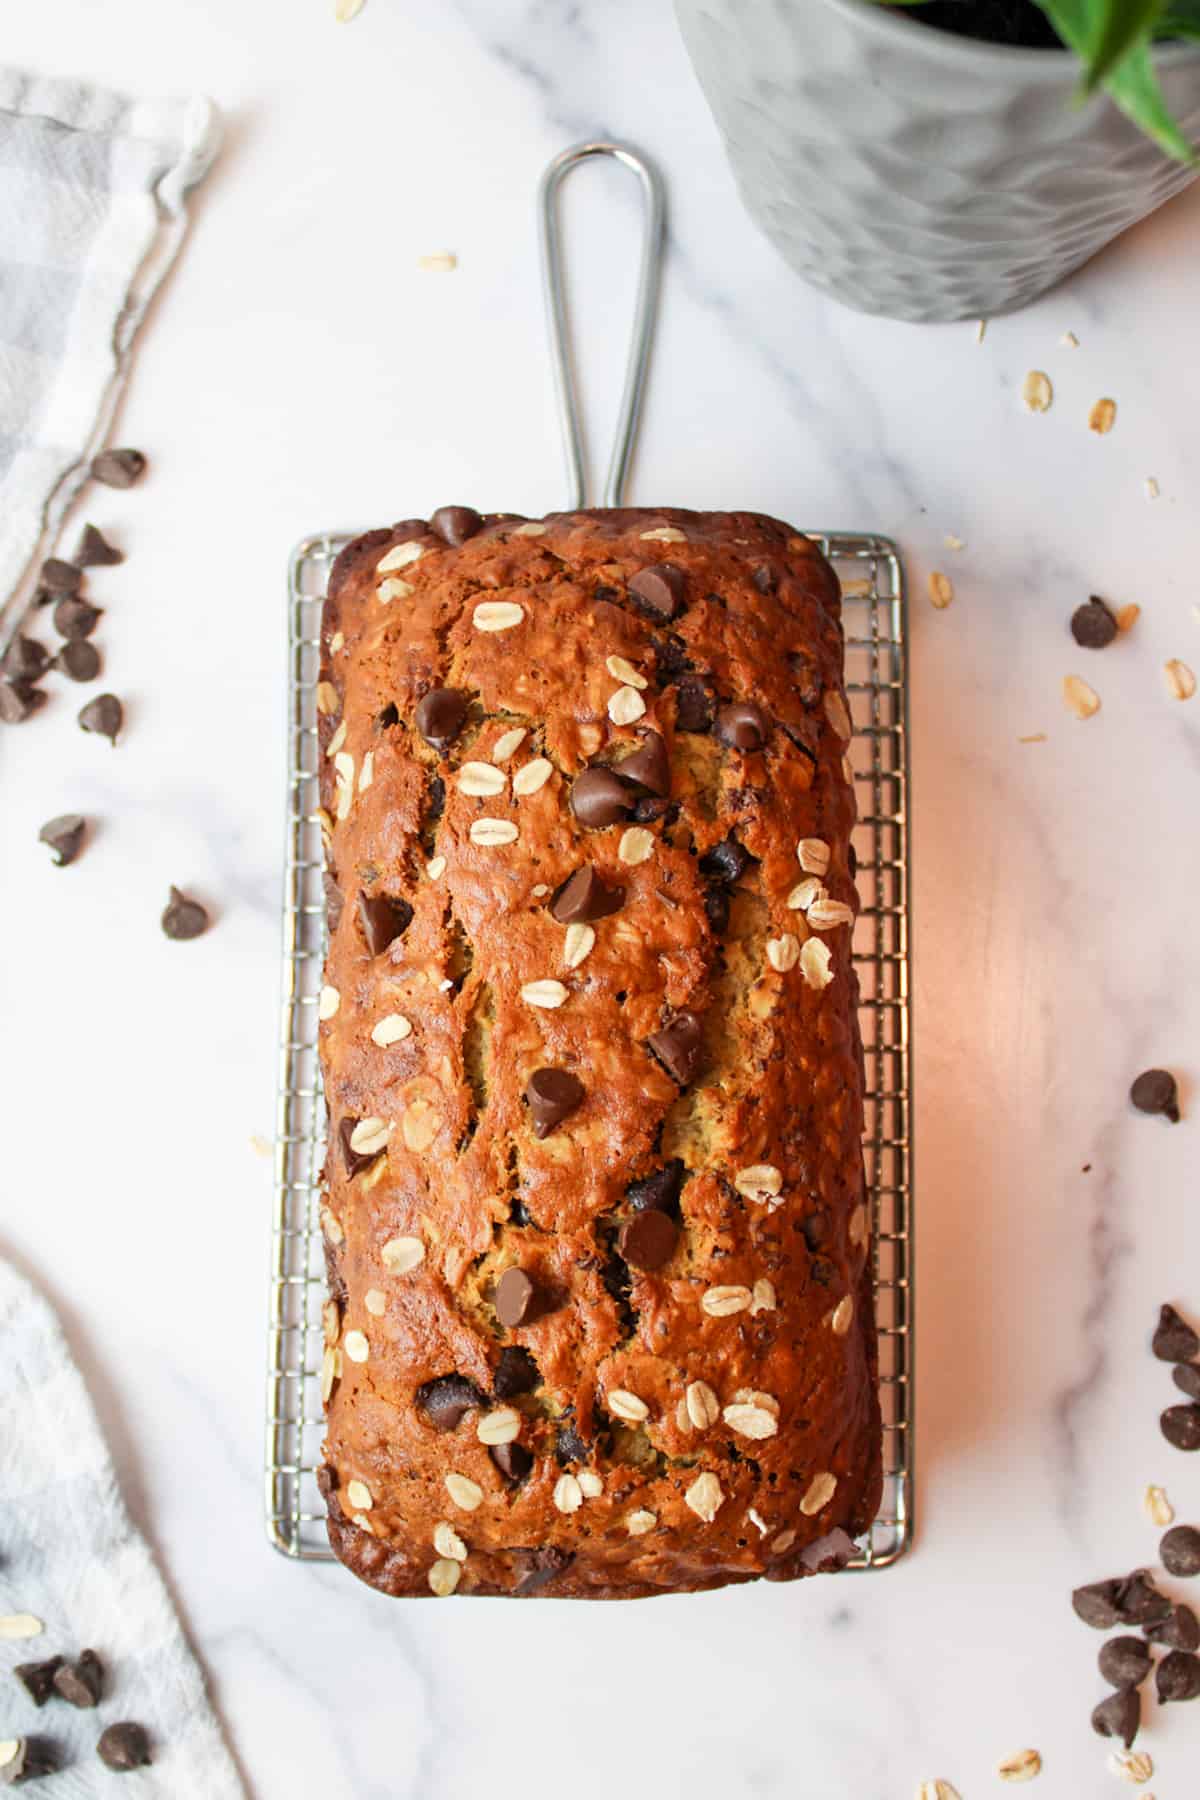 oatmeal choc chip banana bread on a wire rack.